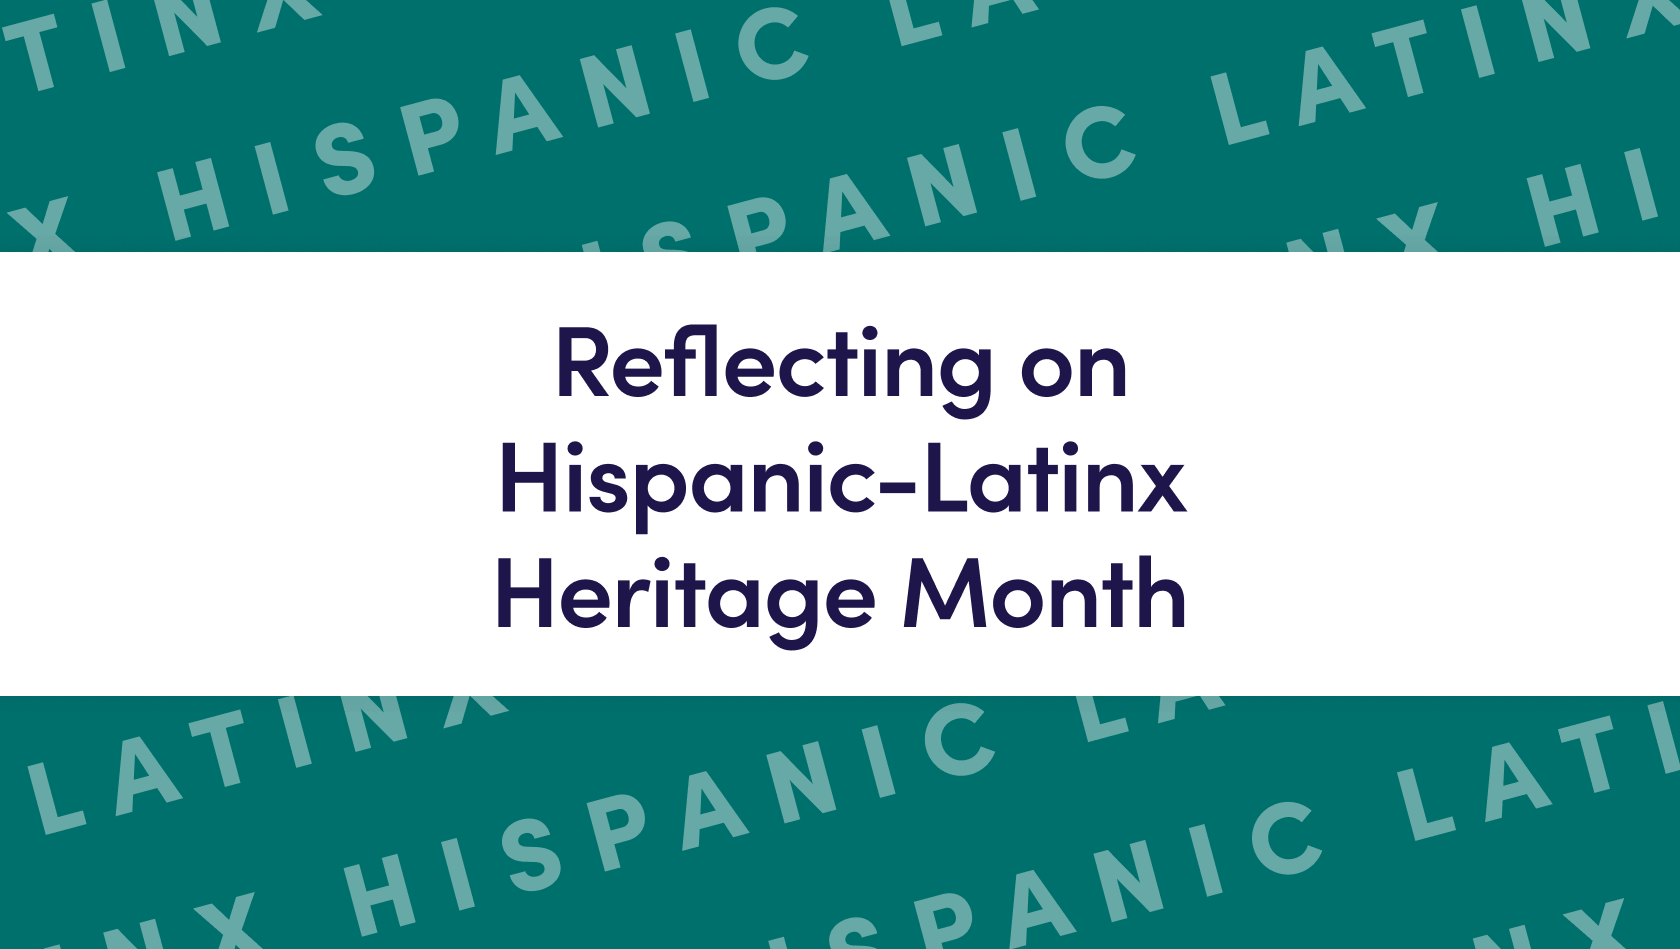 Reflecting on Hispanic-Latinx Heritage Month and the Cannabis Industry